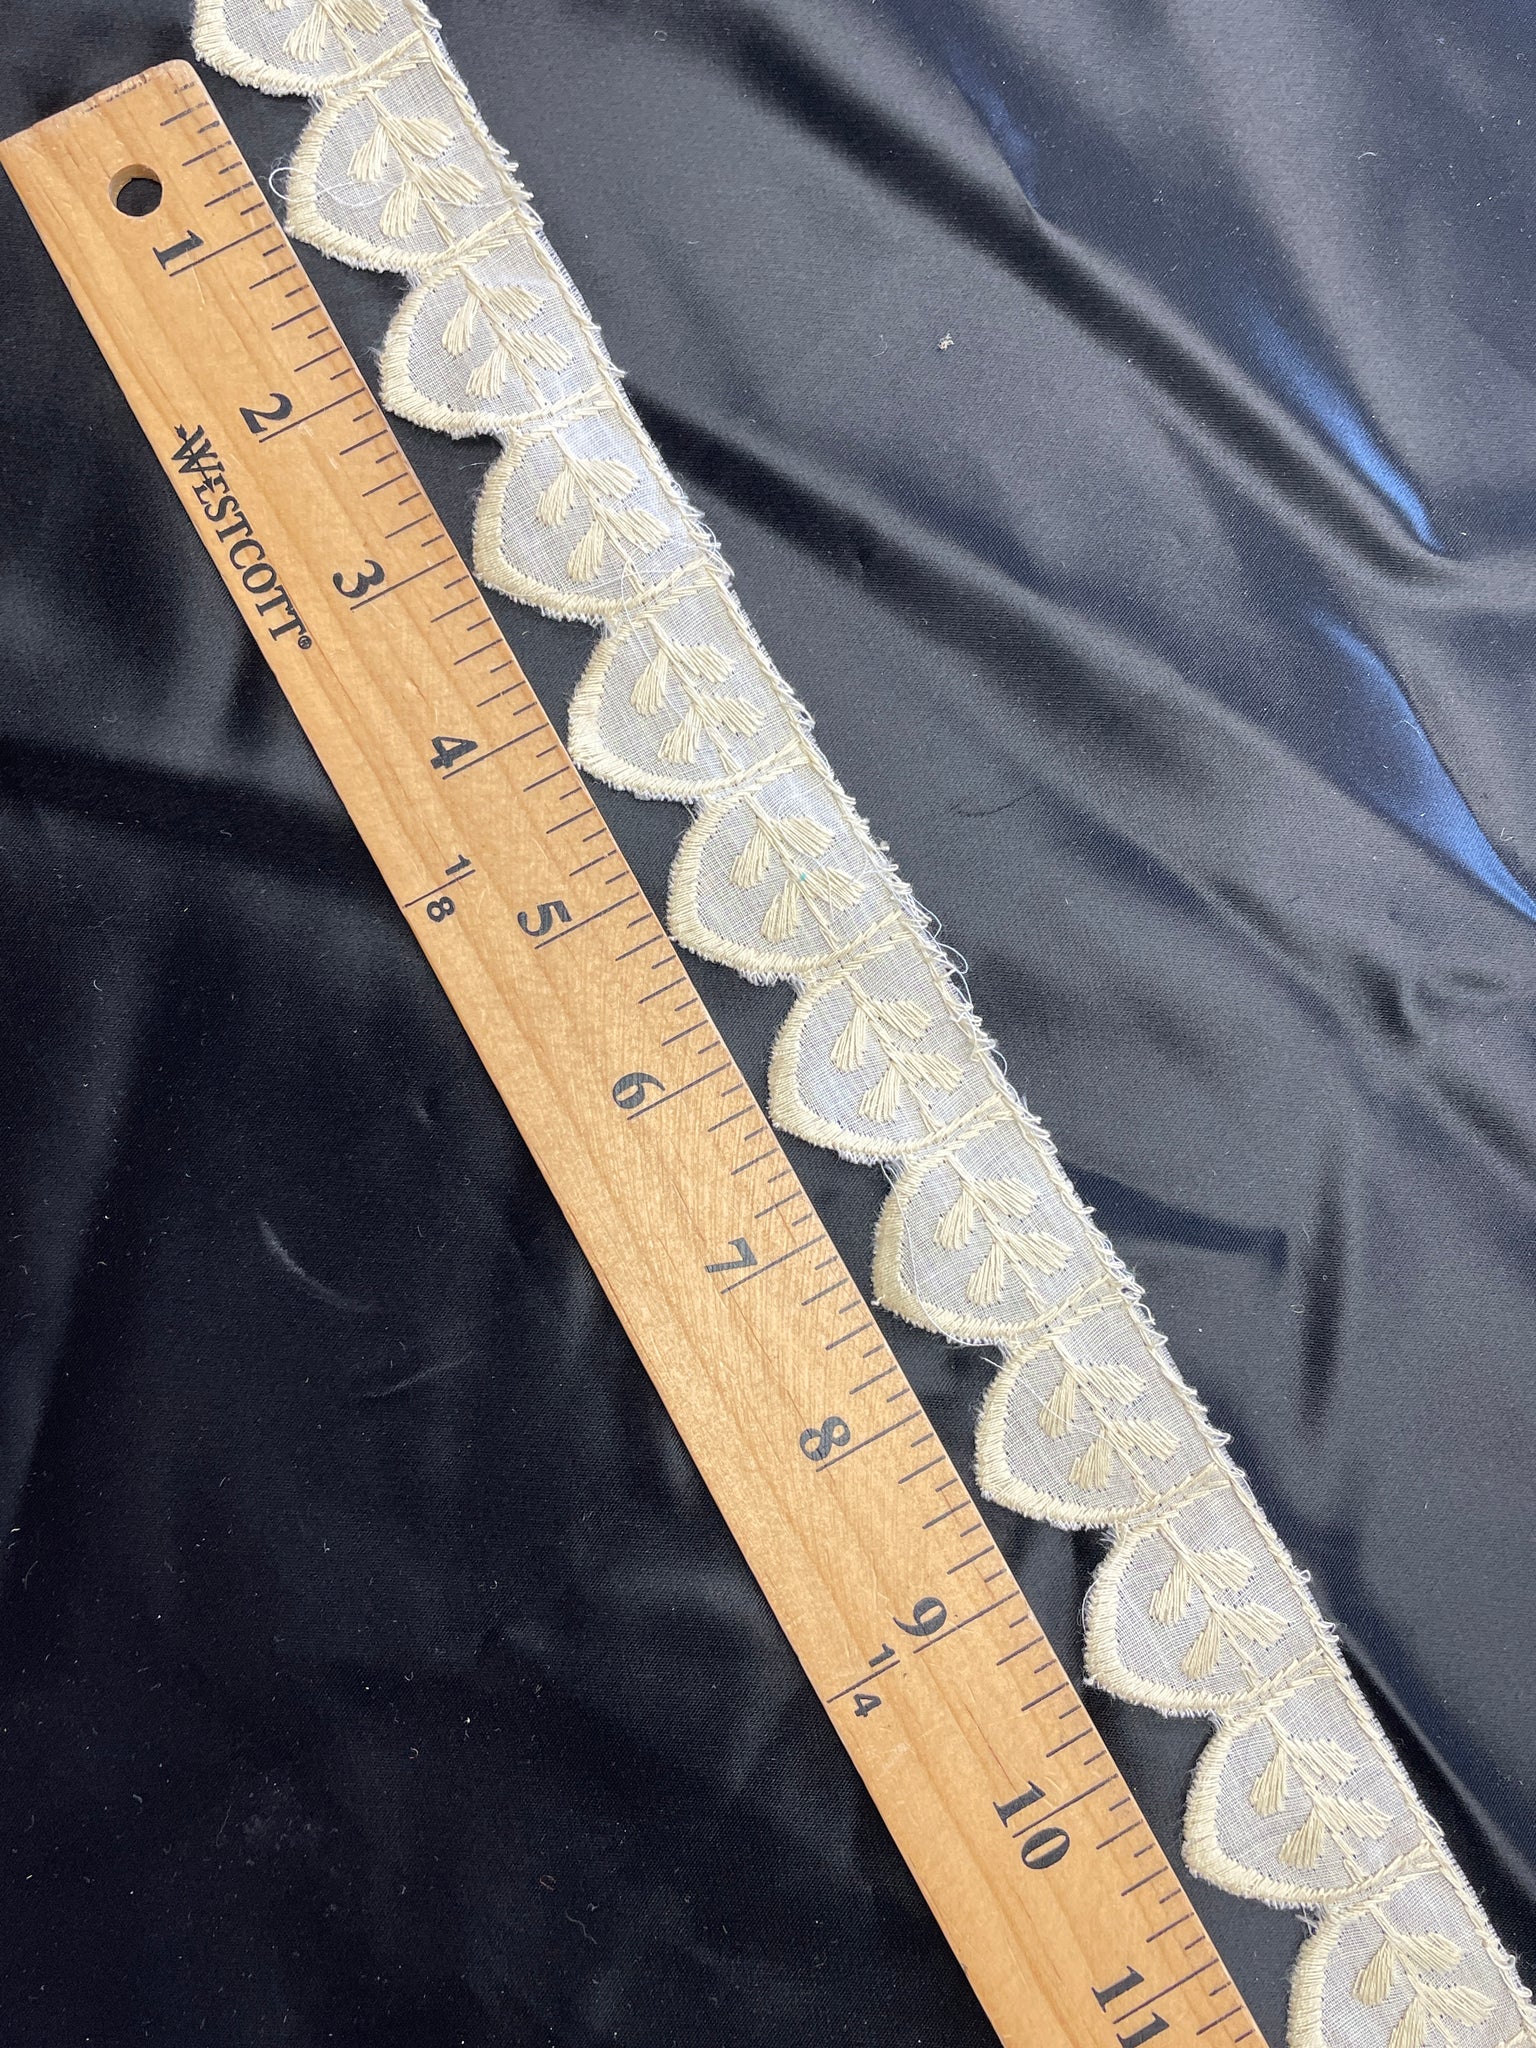 SALE 5 1/4 YD Cotton Embroidered Scalloped Trim Vintage - Off White